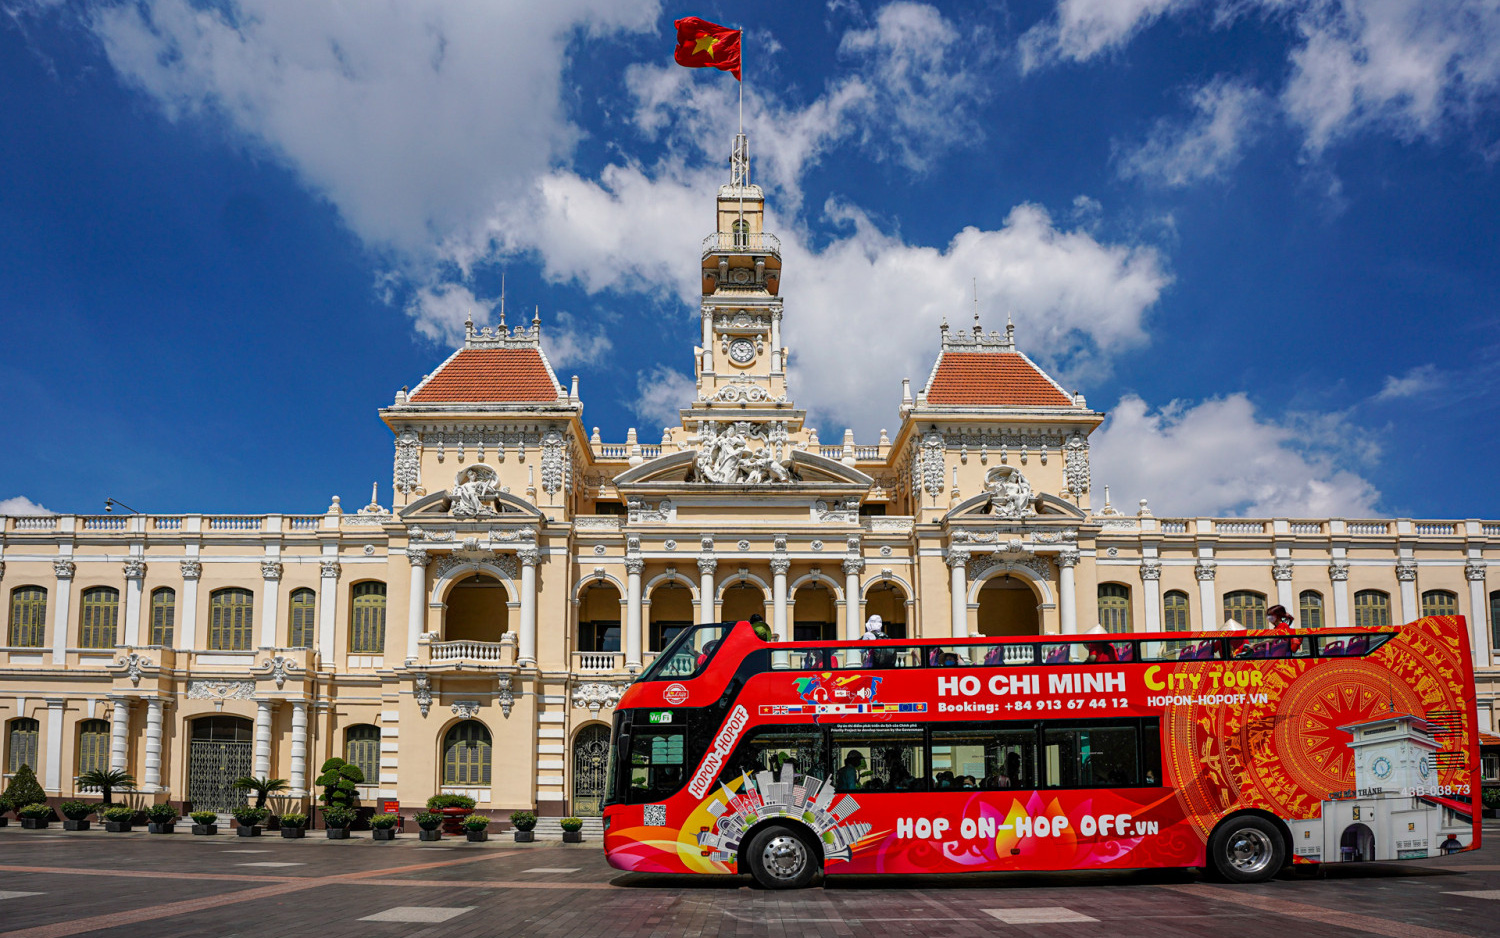 herida Infidelidad Decimal Ho Chi Minh City ready to welcome foreign tourists back | Travel | Vietnam+  (VietnamPlus)